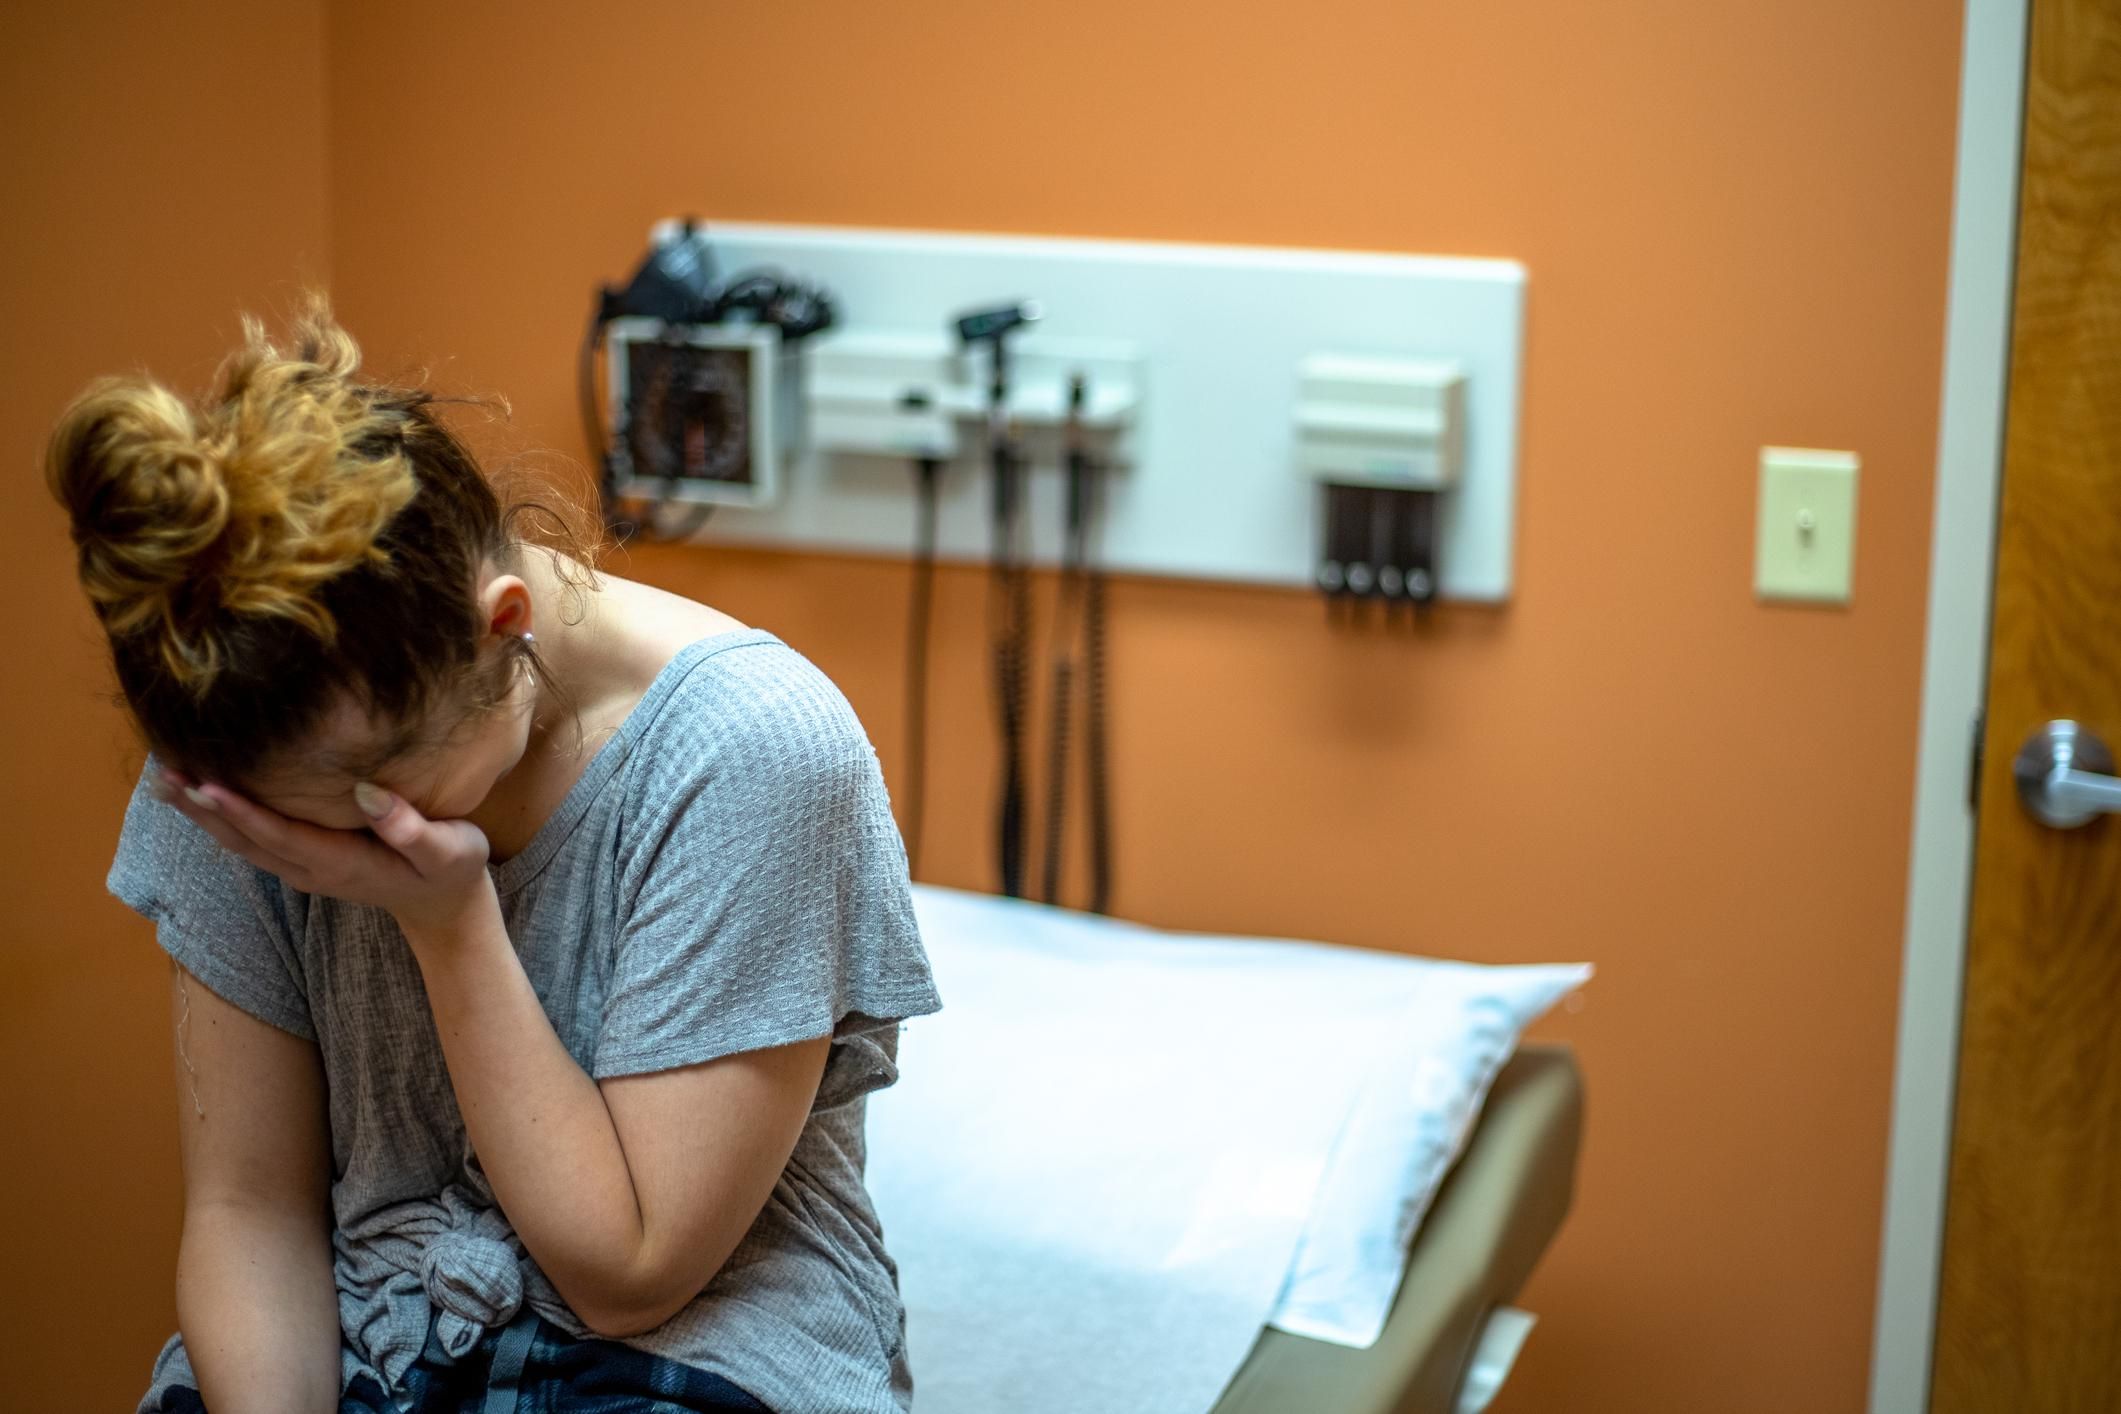 A teenager goes to Urgent Care when she is feeling sick